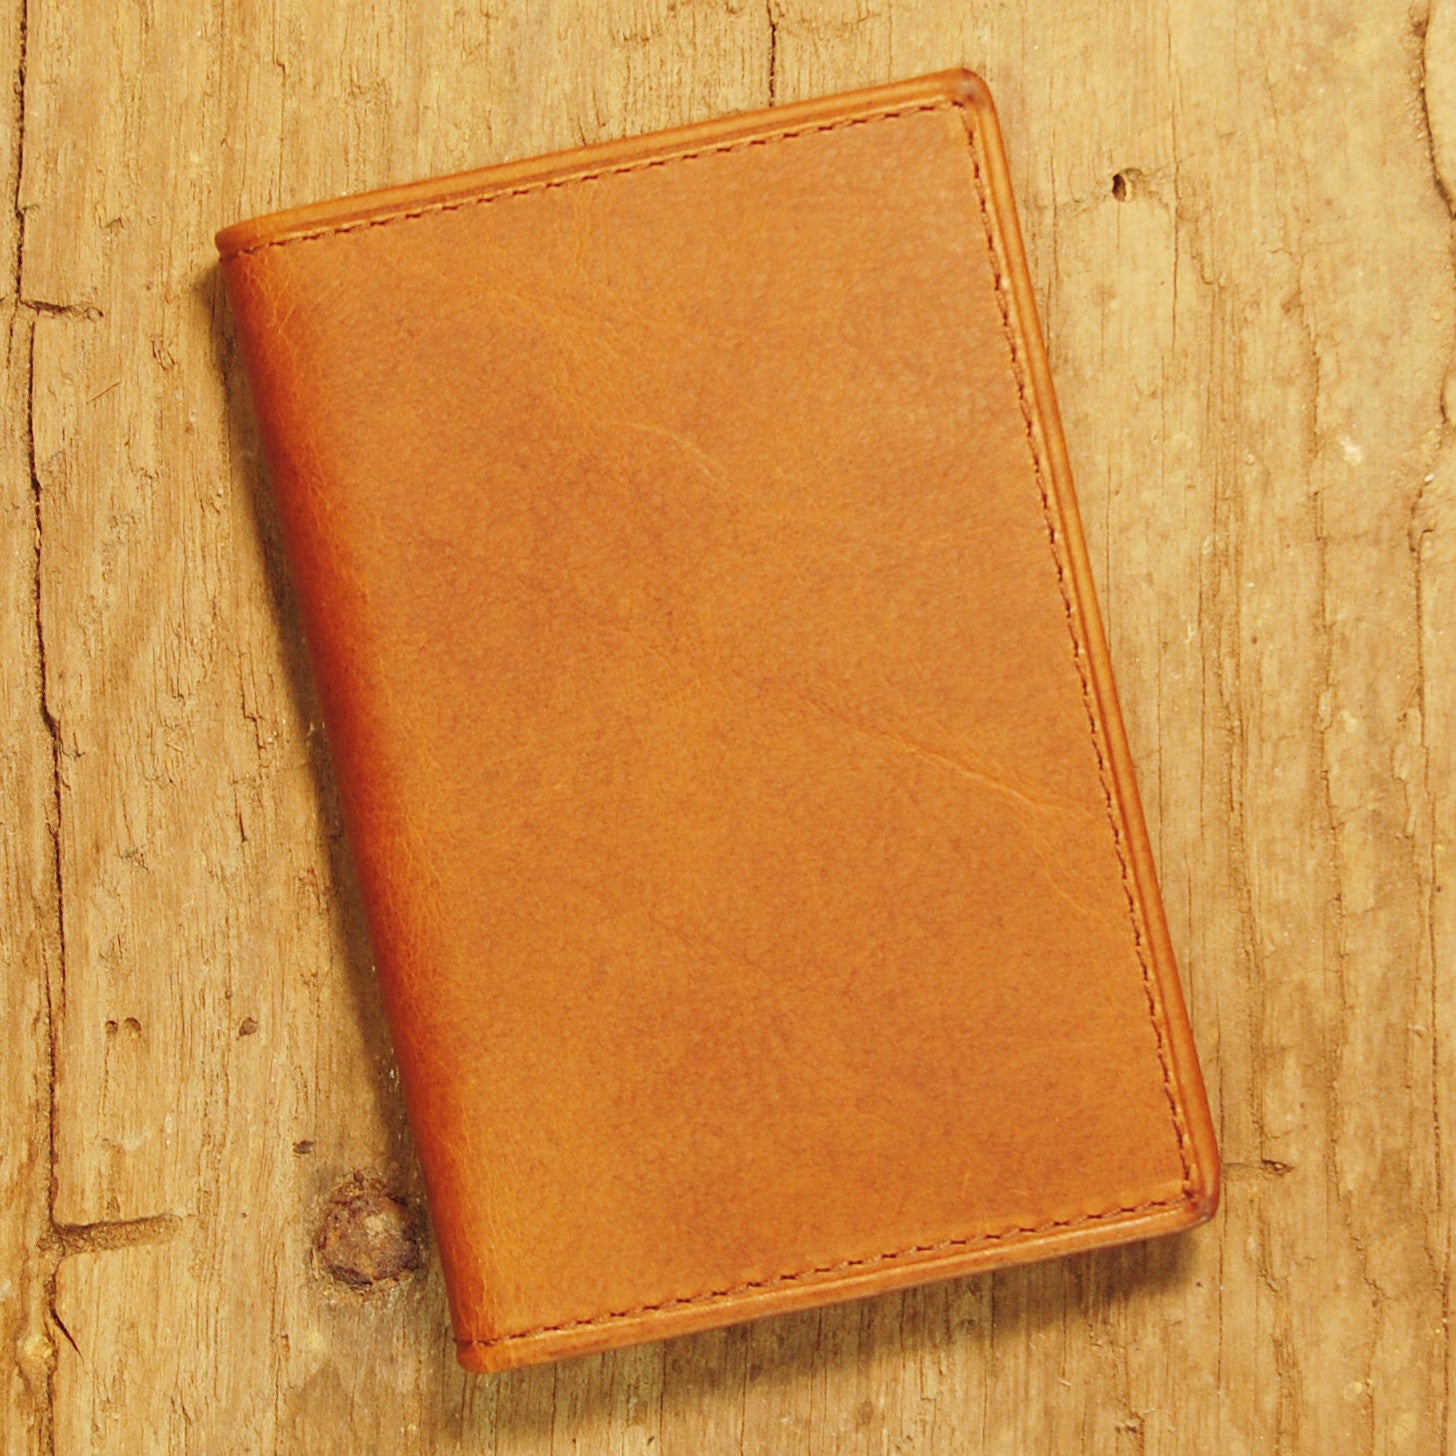 Dark's Leather Gusset Card Case in Bison Whiskey, Front